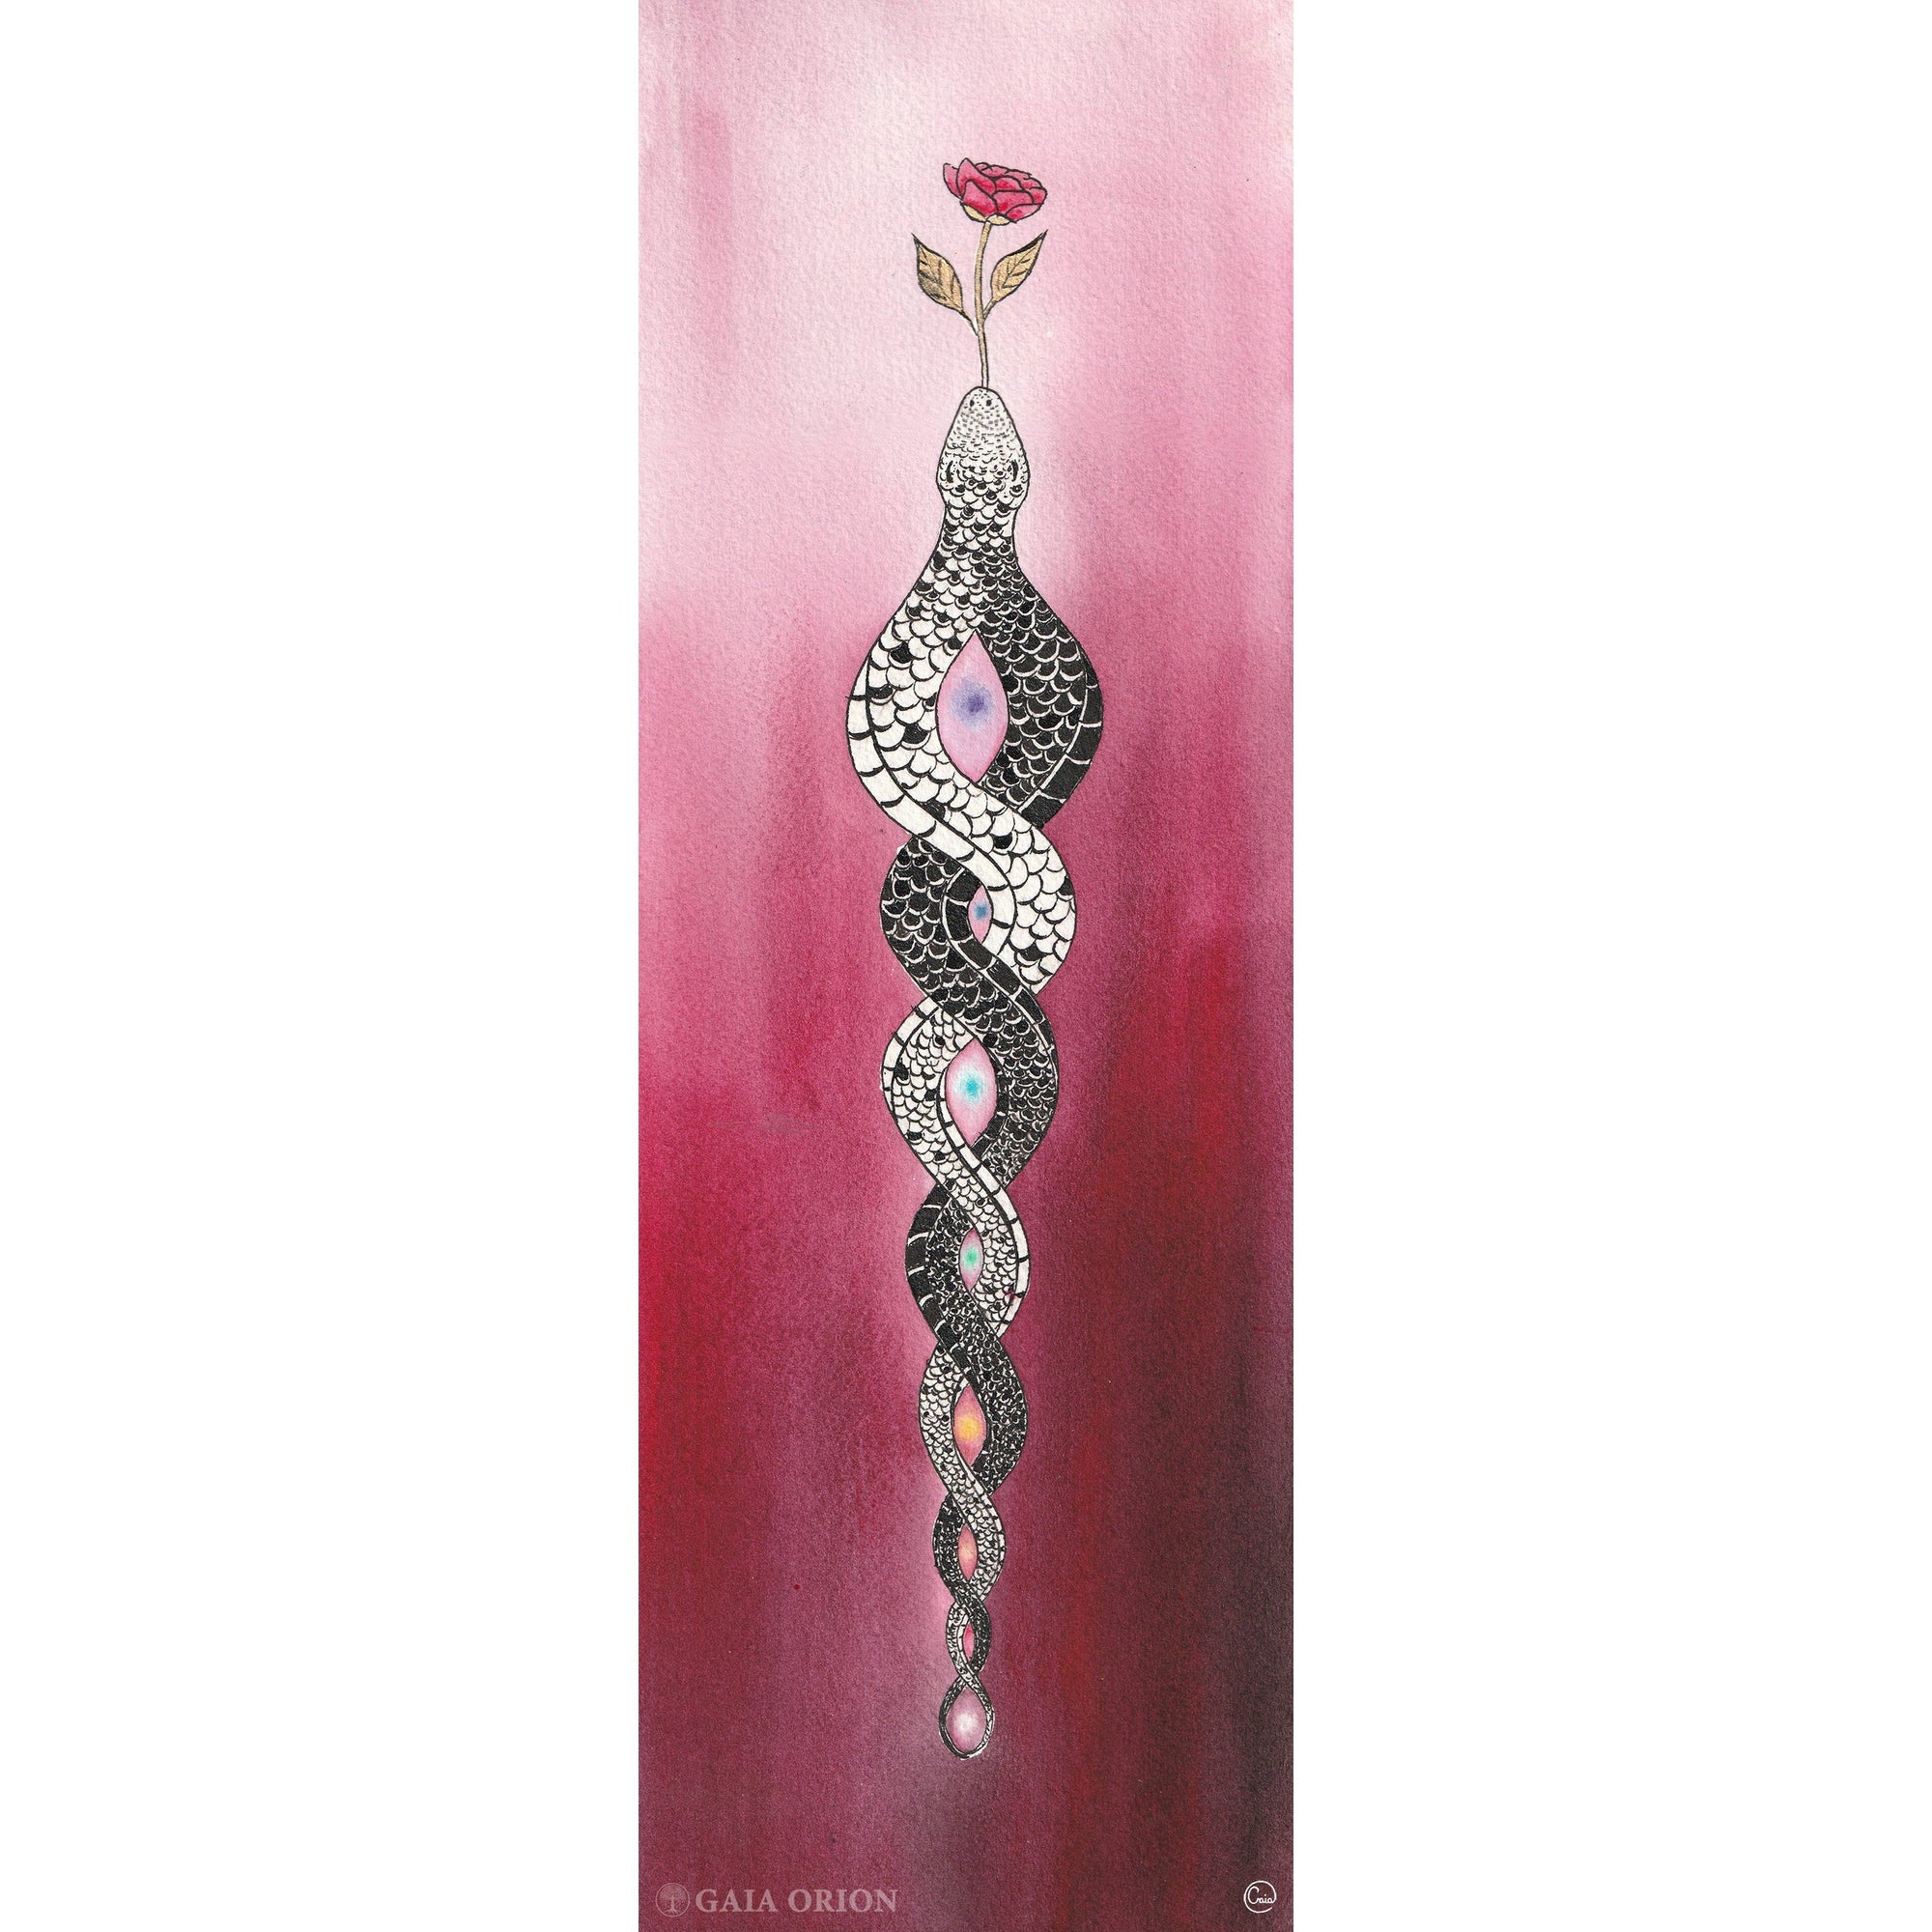 A framed study sketch about tantric love symbolized by a black and white snake joined with a rose symbolizing sacred sexuality